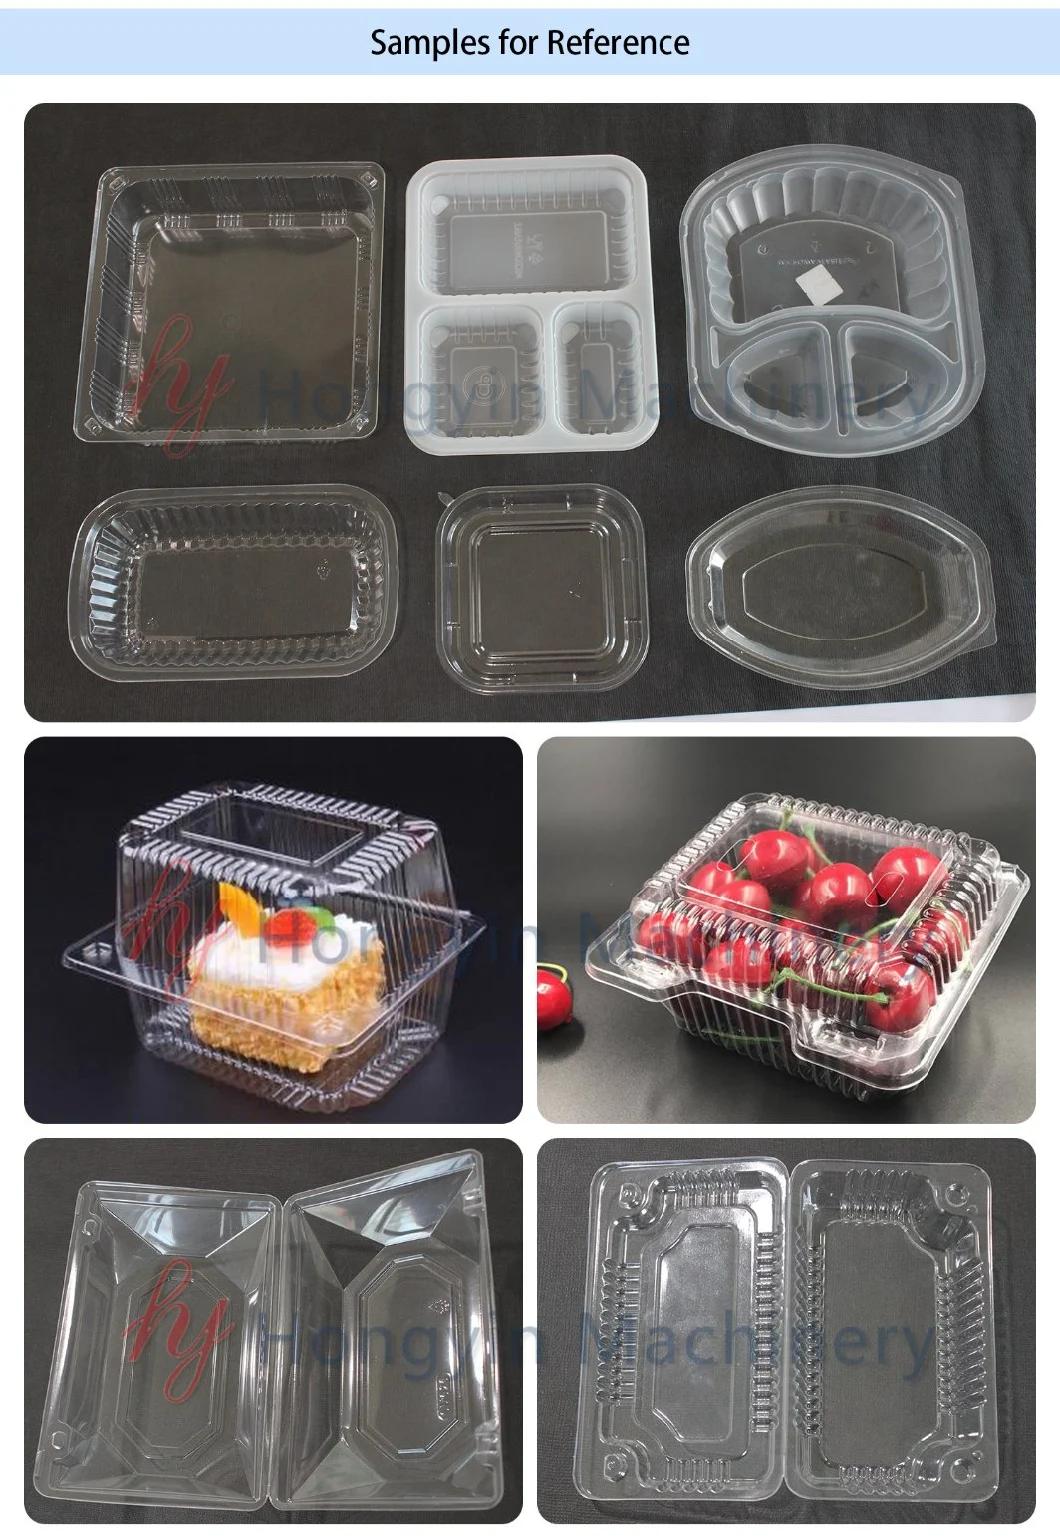 Labor Saving Disposale Plastic Lunch Box Food Tray Thermoforming Machine